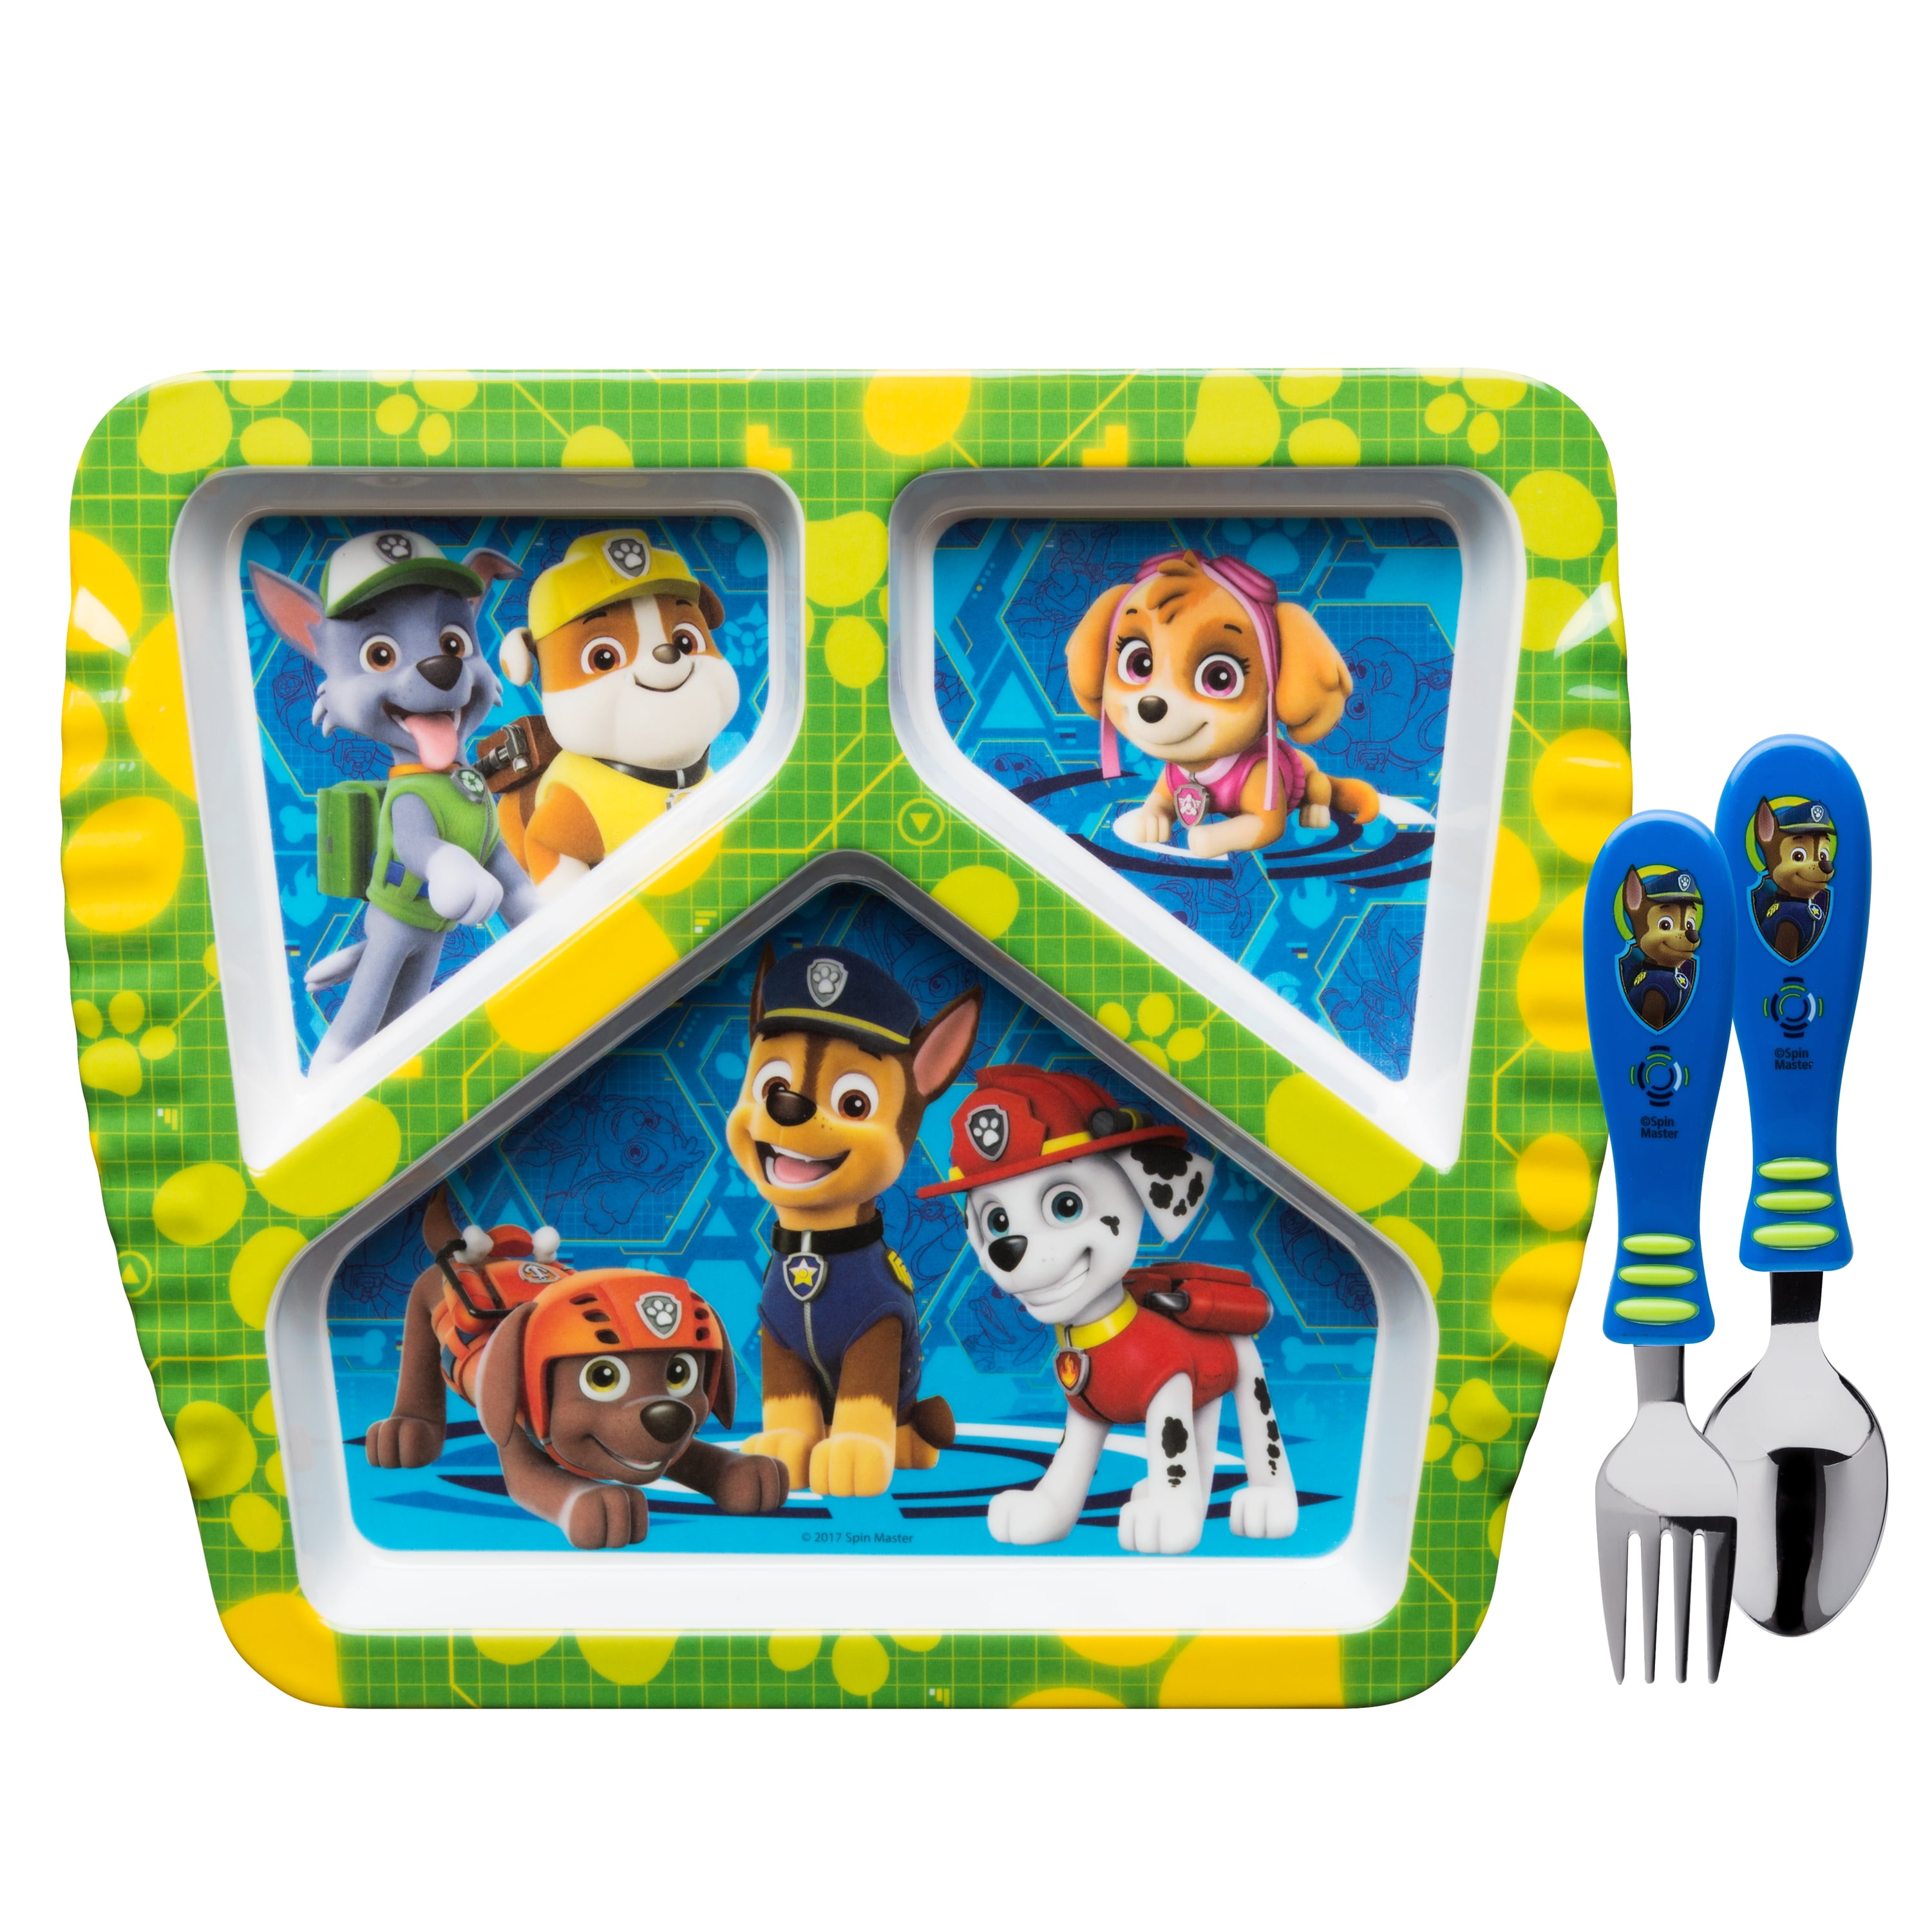 NICKELODEON PAW PATROL MEALTIME DINNER SET WITH BOWL CUP AND PLATE MICROWAVEABLE 